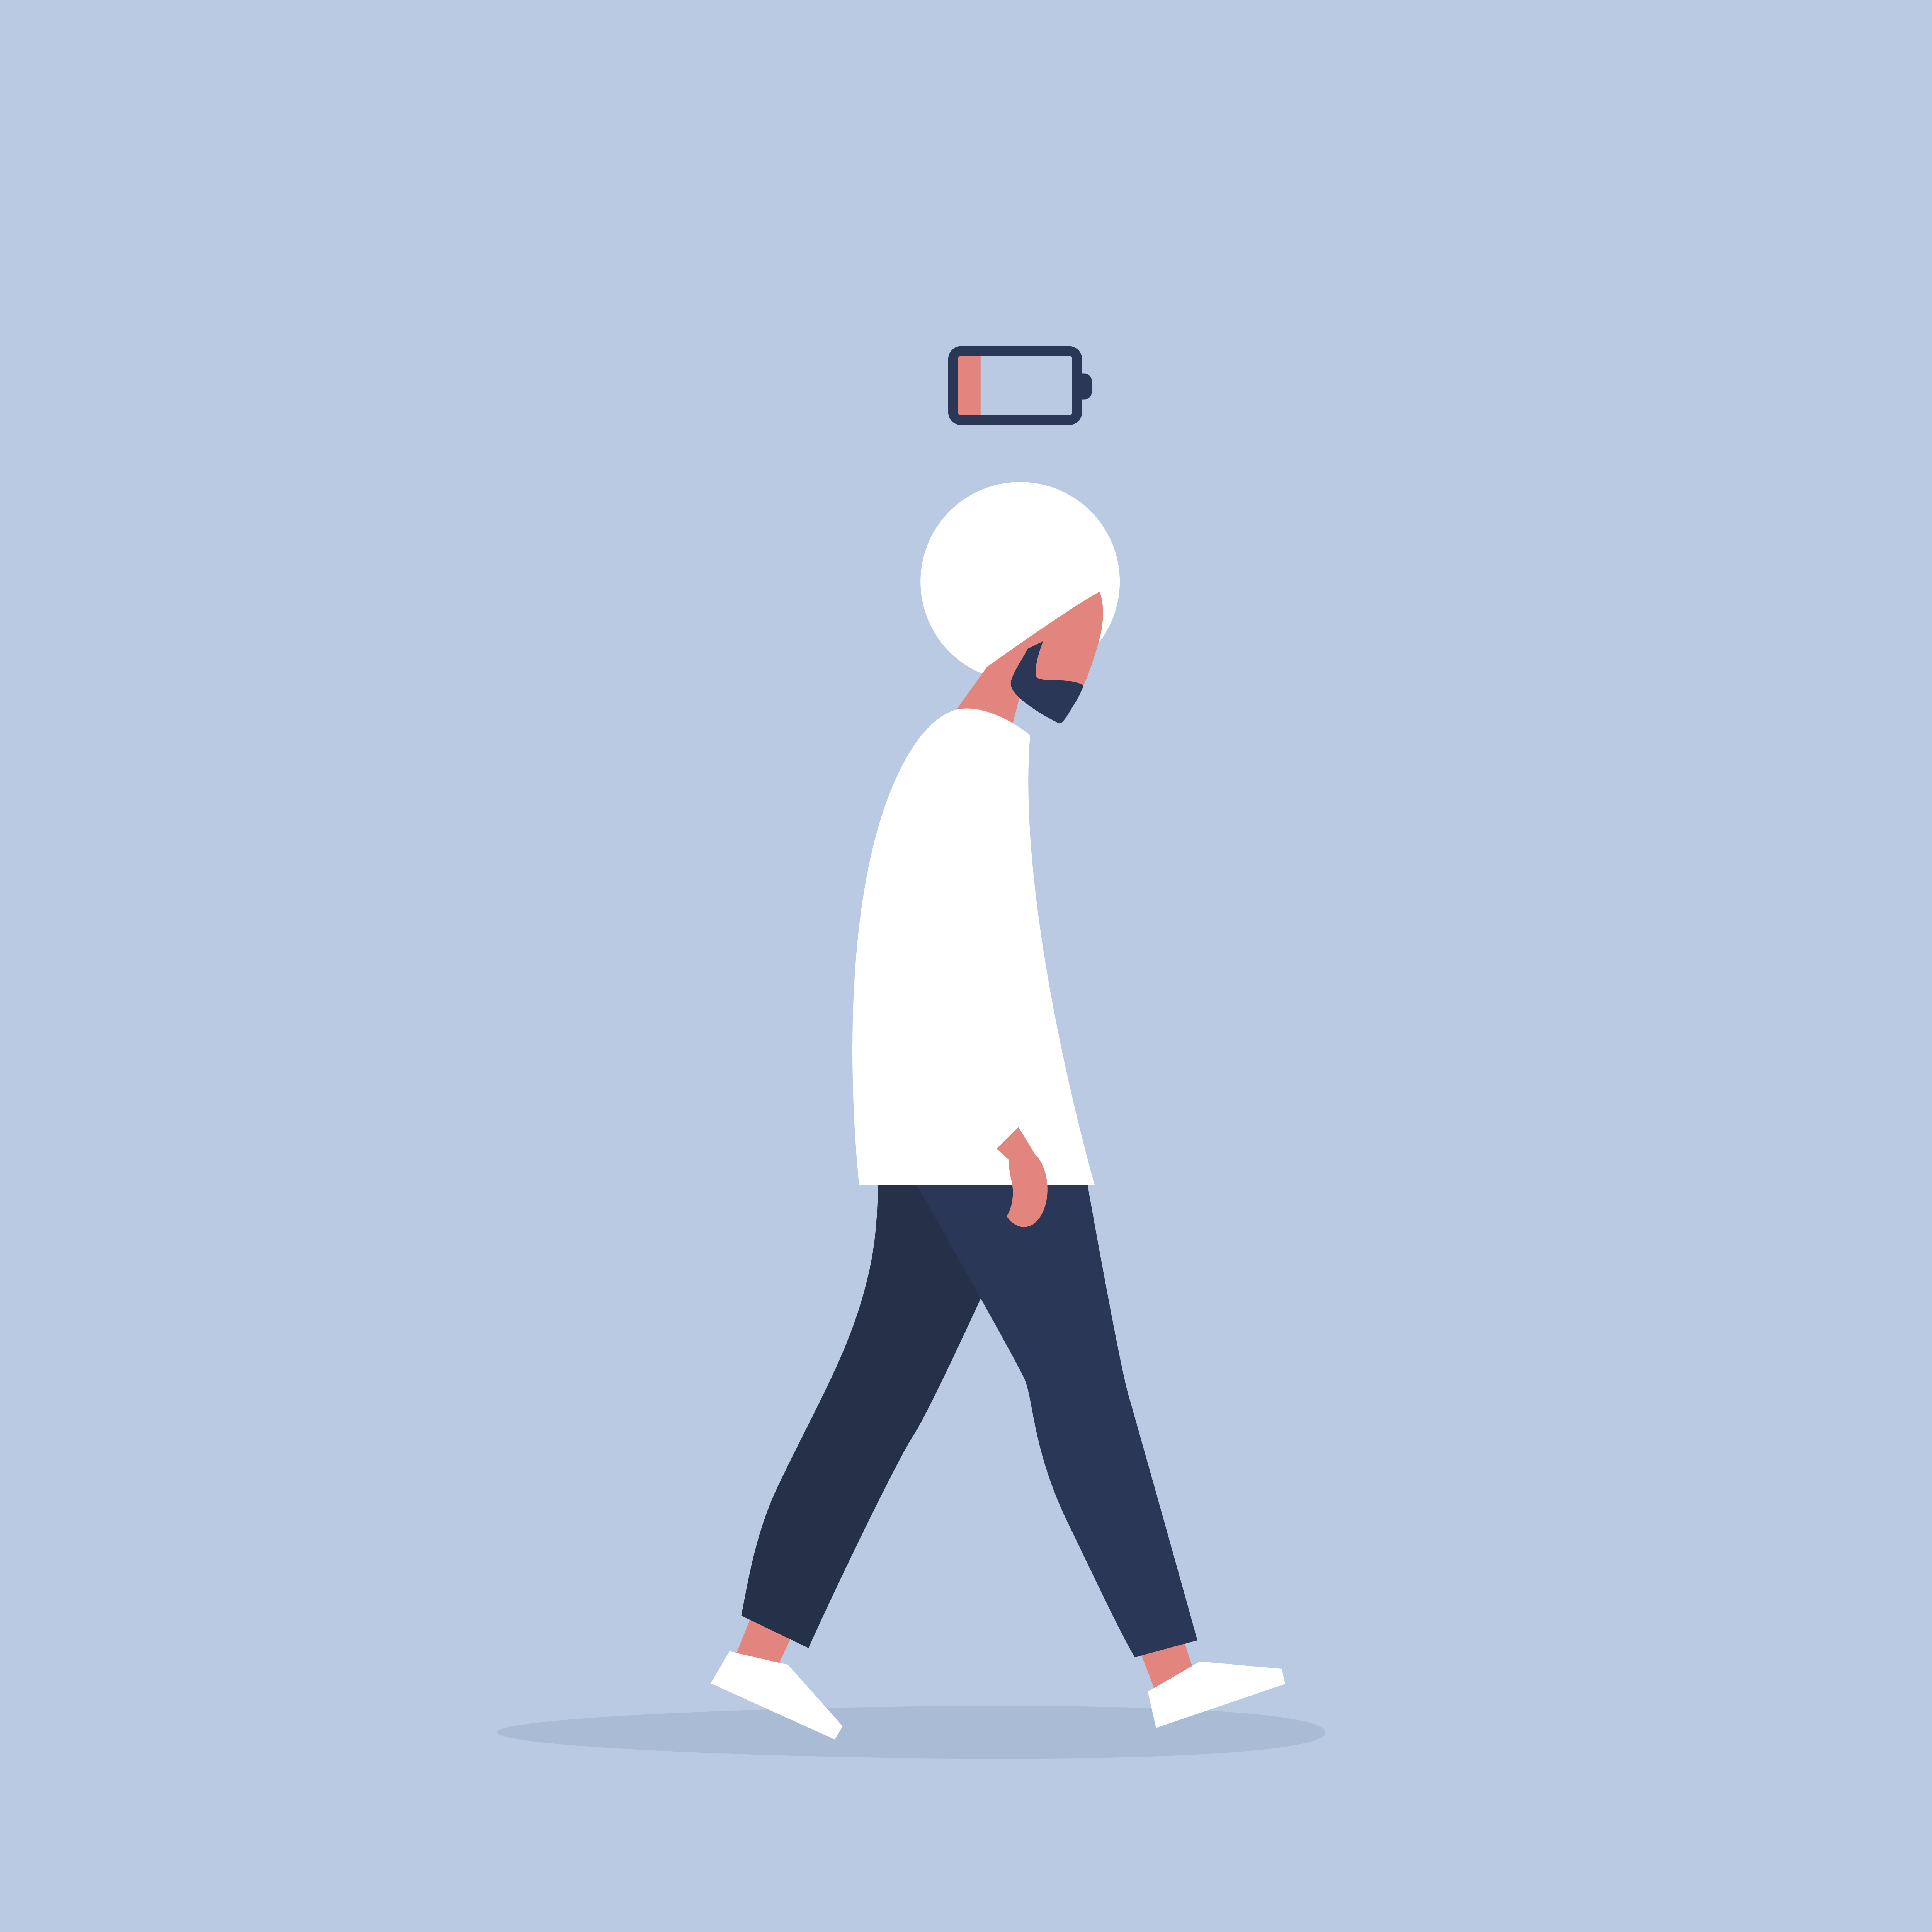 Designing technology that promotes users' digital wellbeing